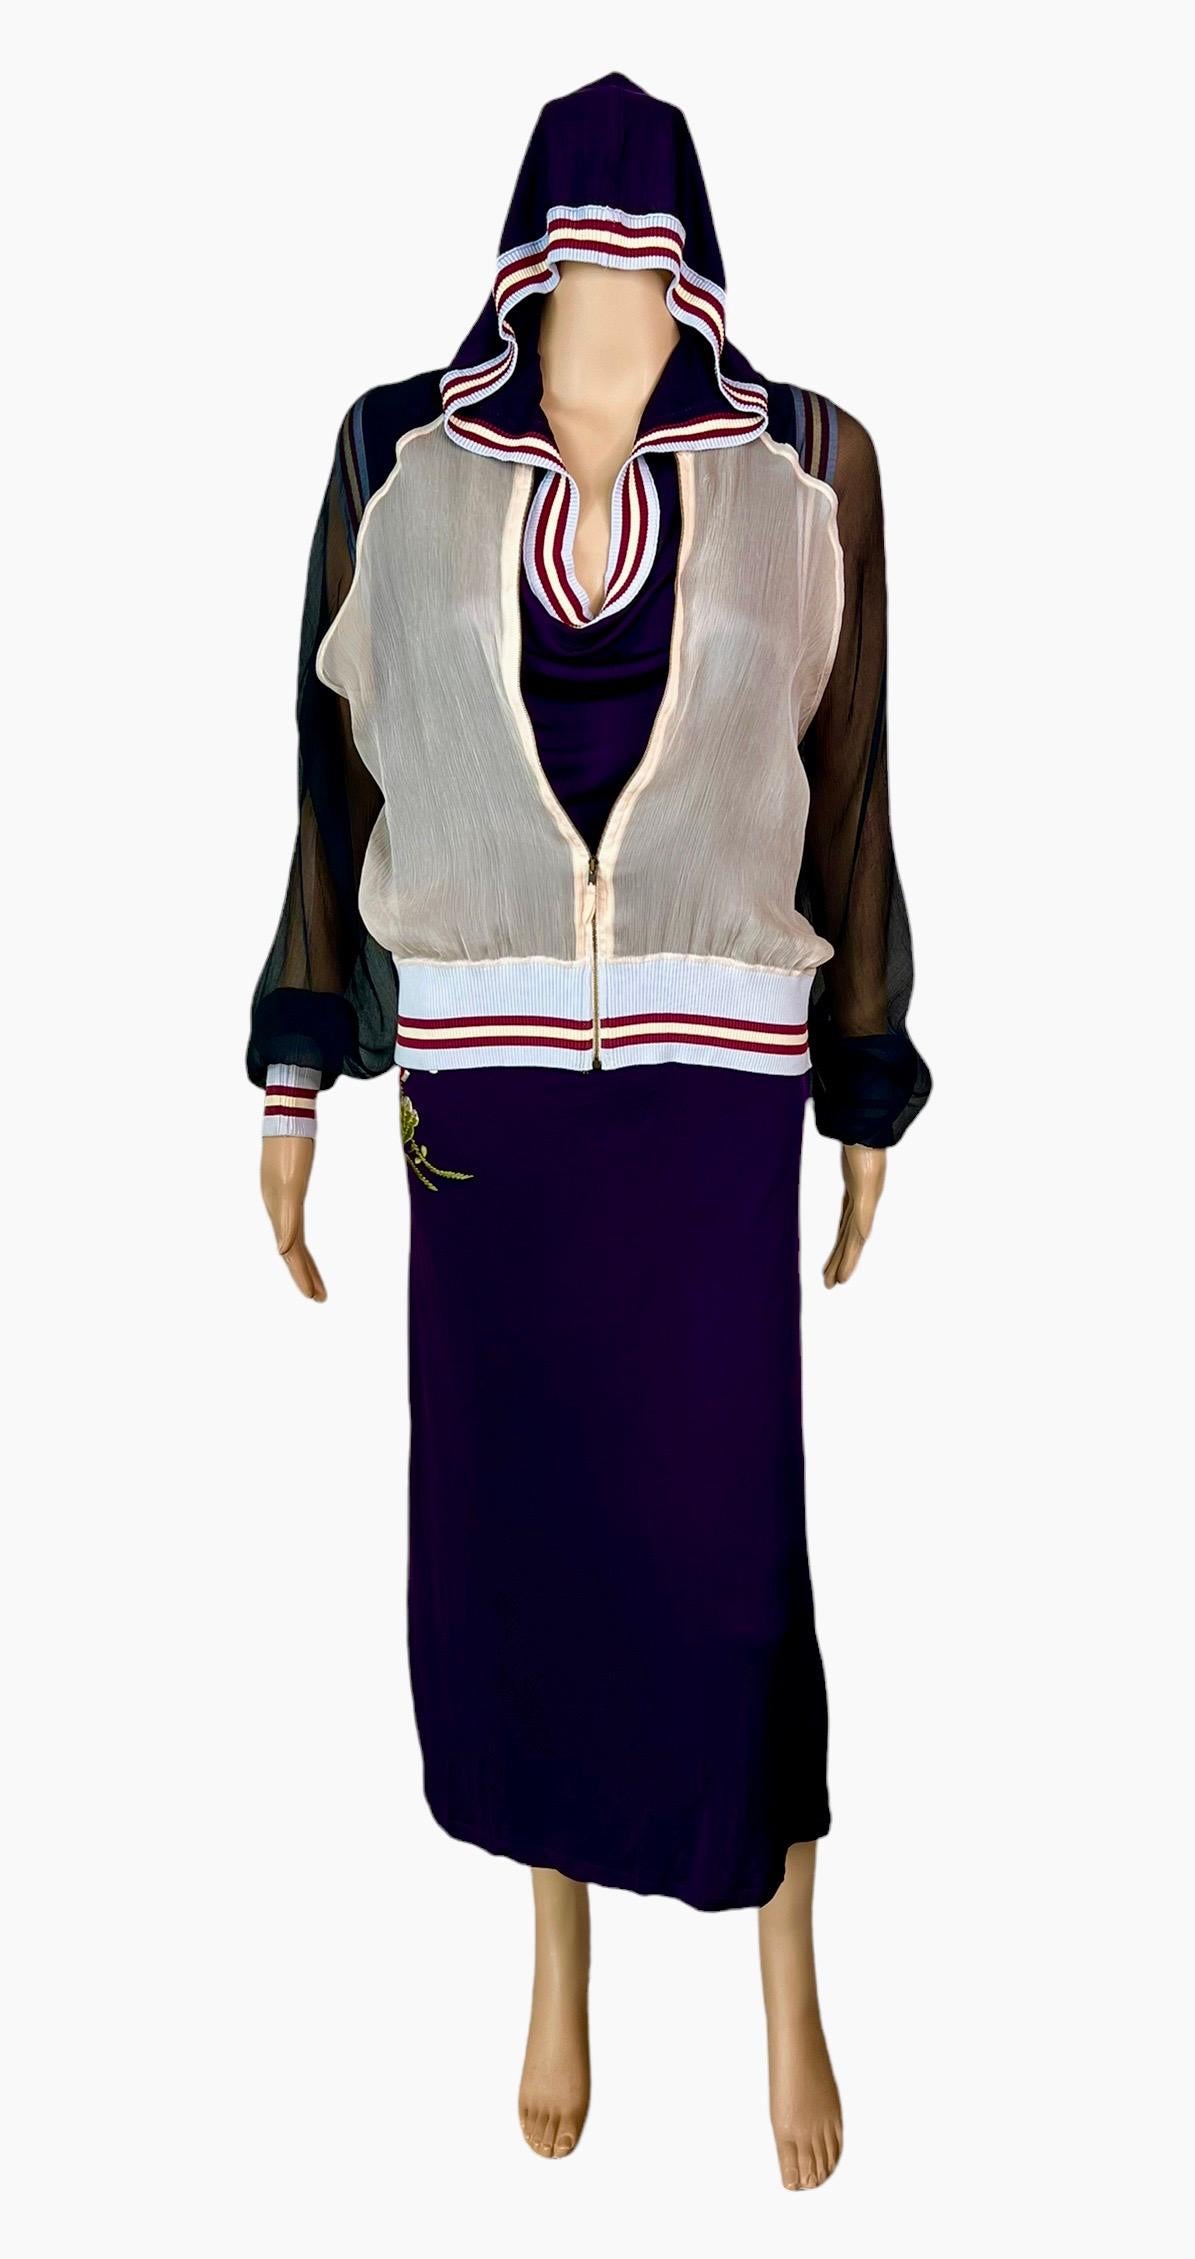 Jean Paul Gaultier S/S 2007 Embroidered Sheer Hooded Jacket & Dress 2 Piece Set  In Good Condition For Sale In Naples, FL